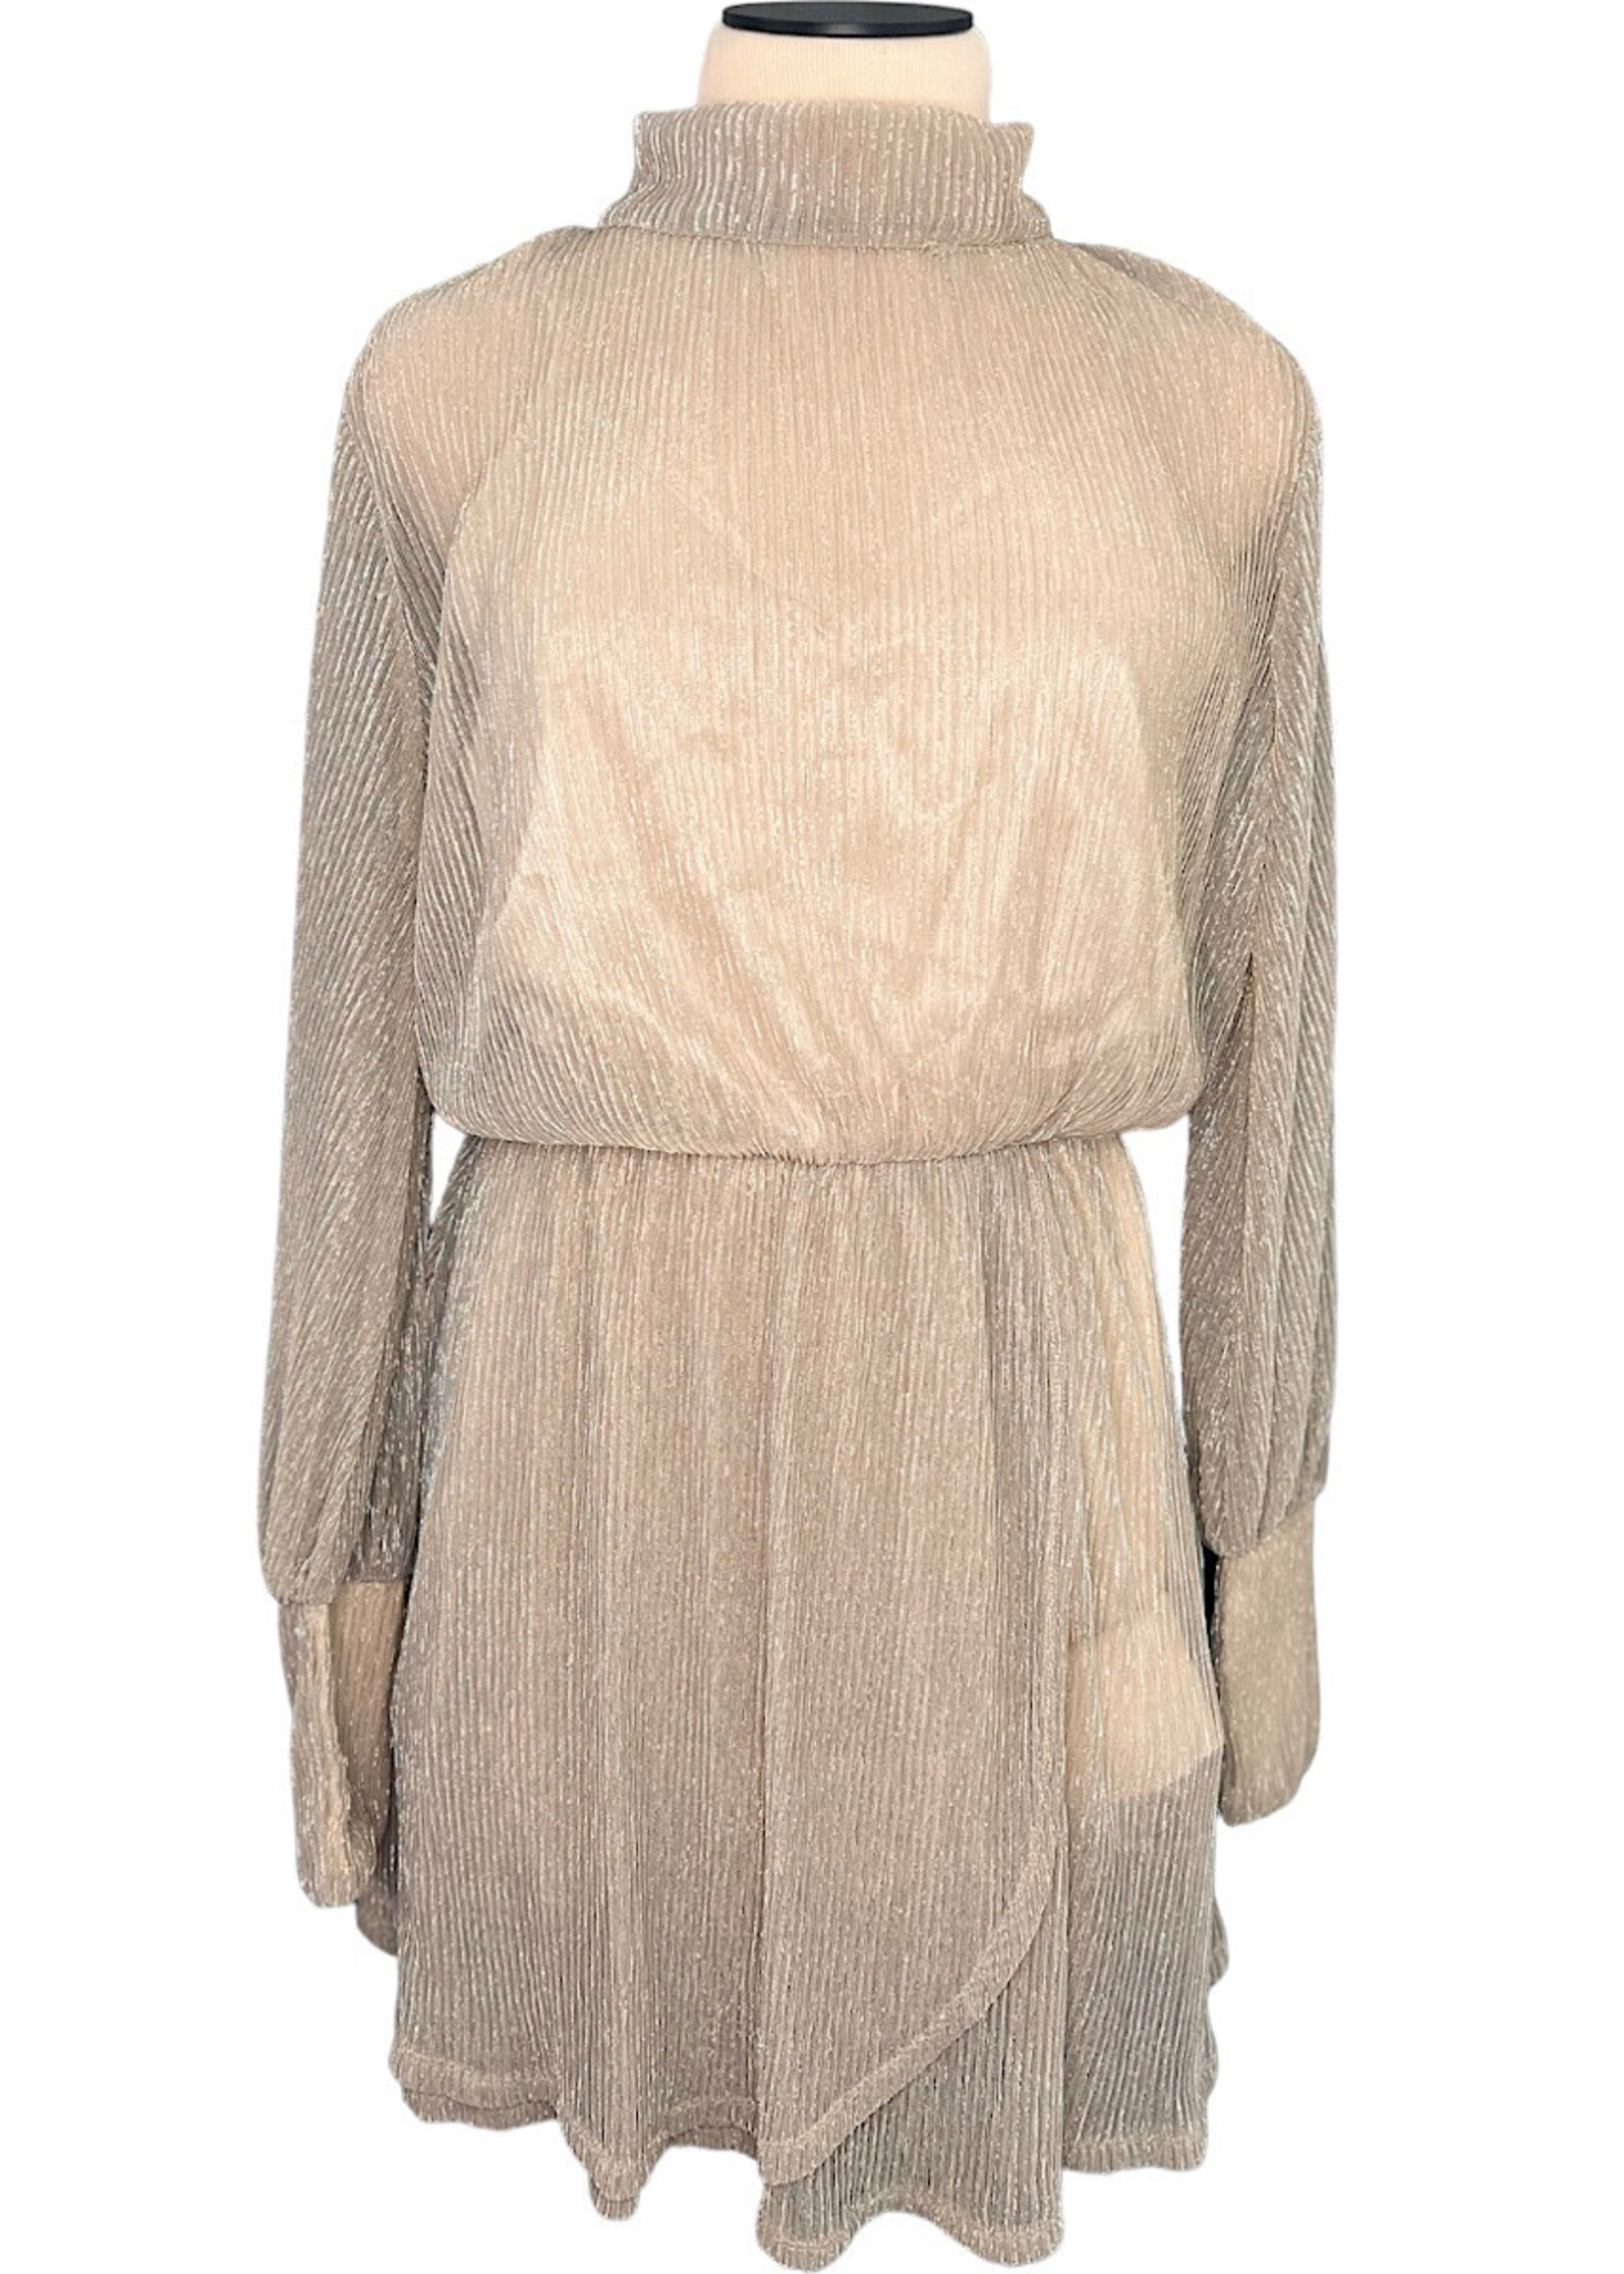 Taupe Dress With Bow Tie